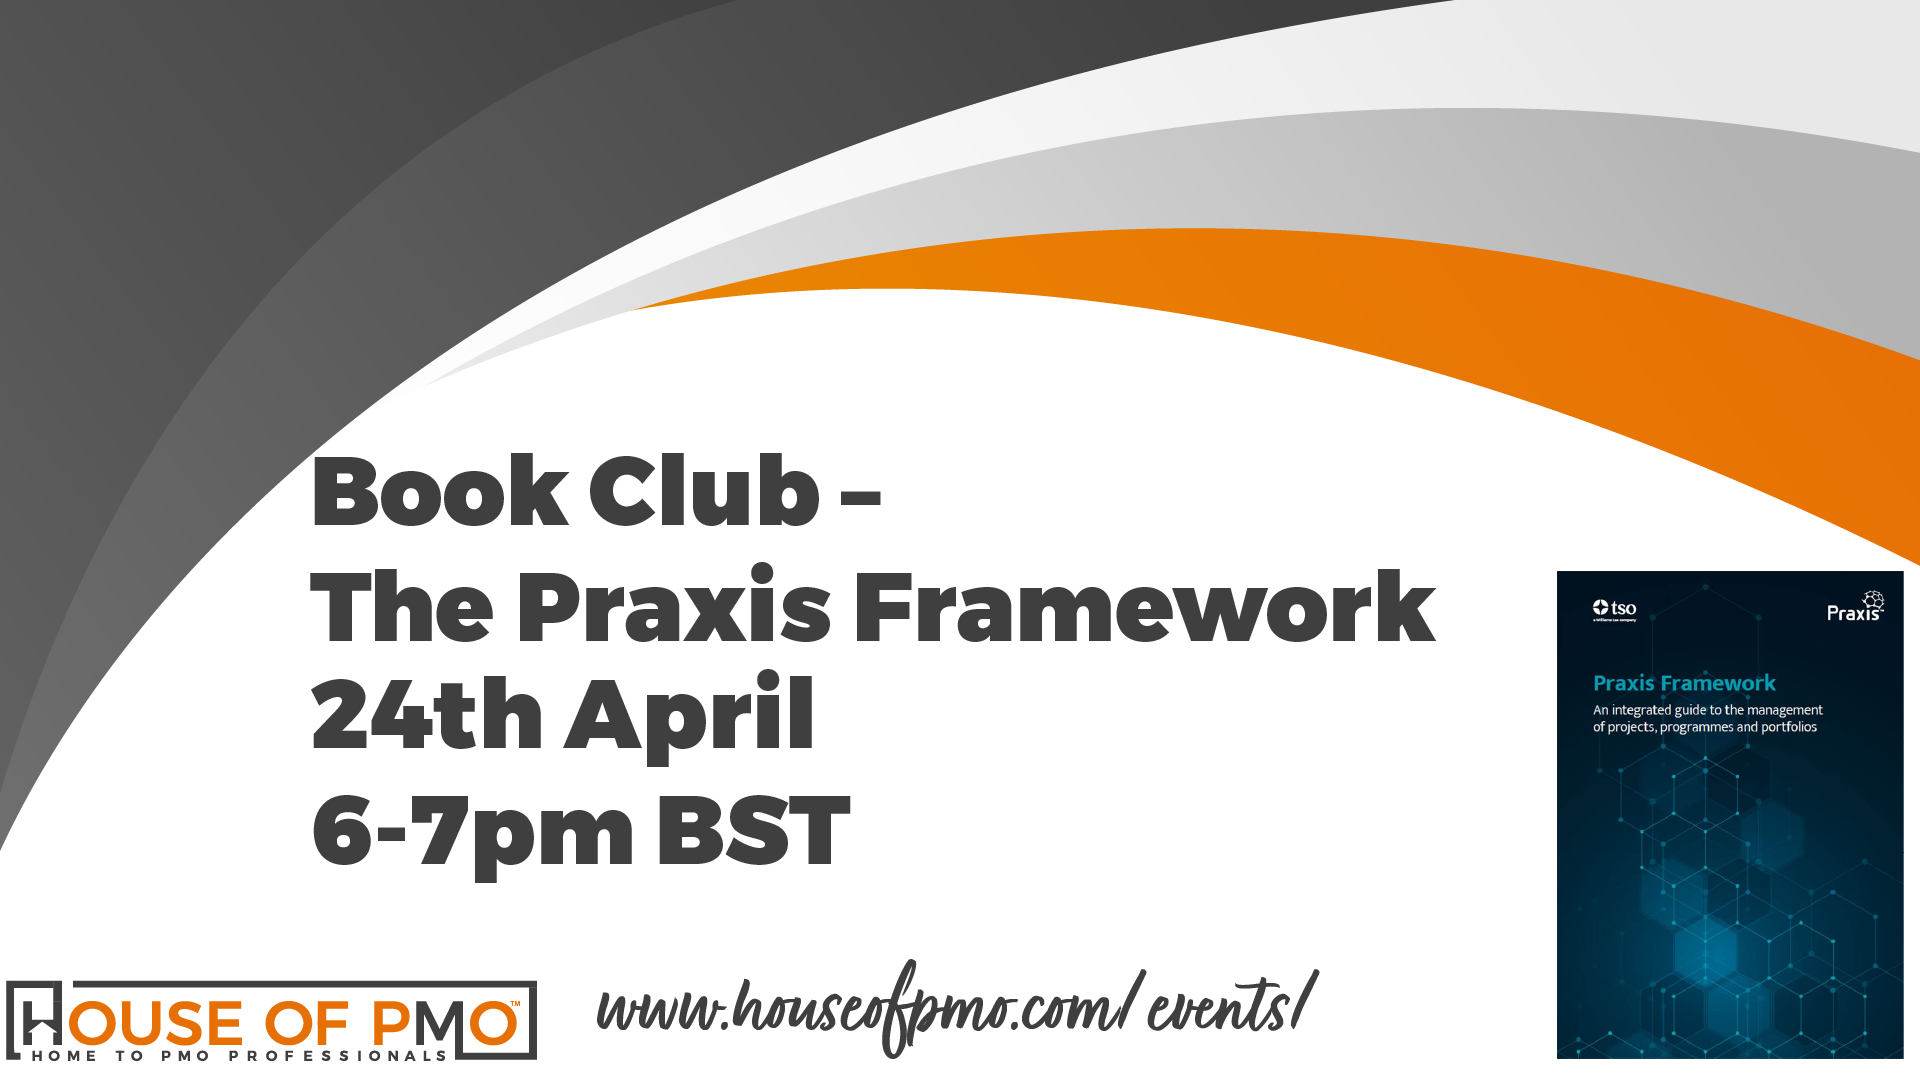 Image for the event book club the praxis framework happening on the 24th of April at 6 pm. it shows the image of the book cover.